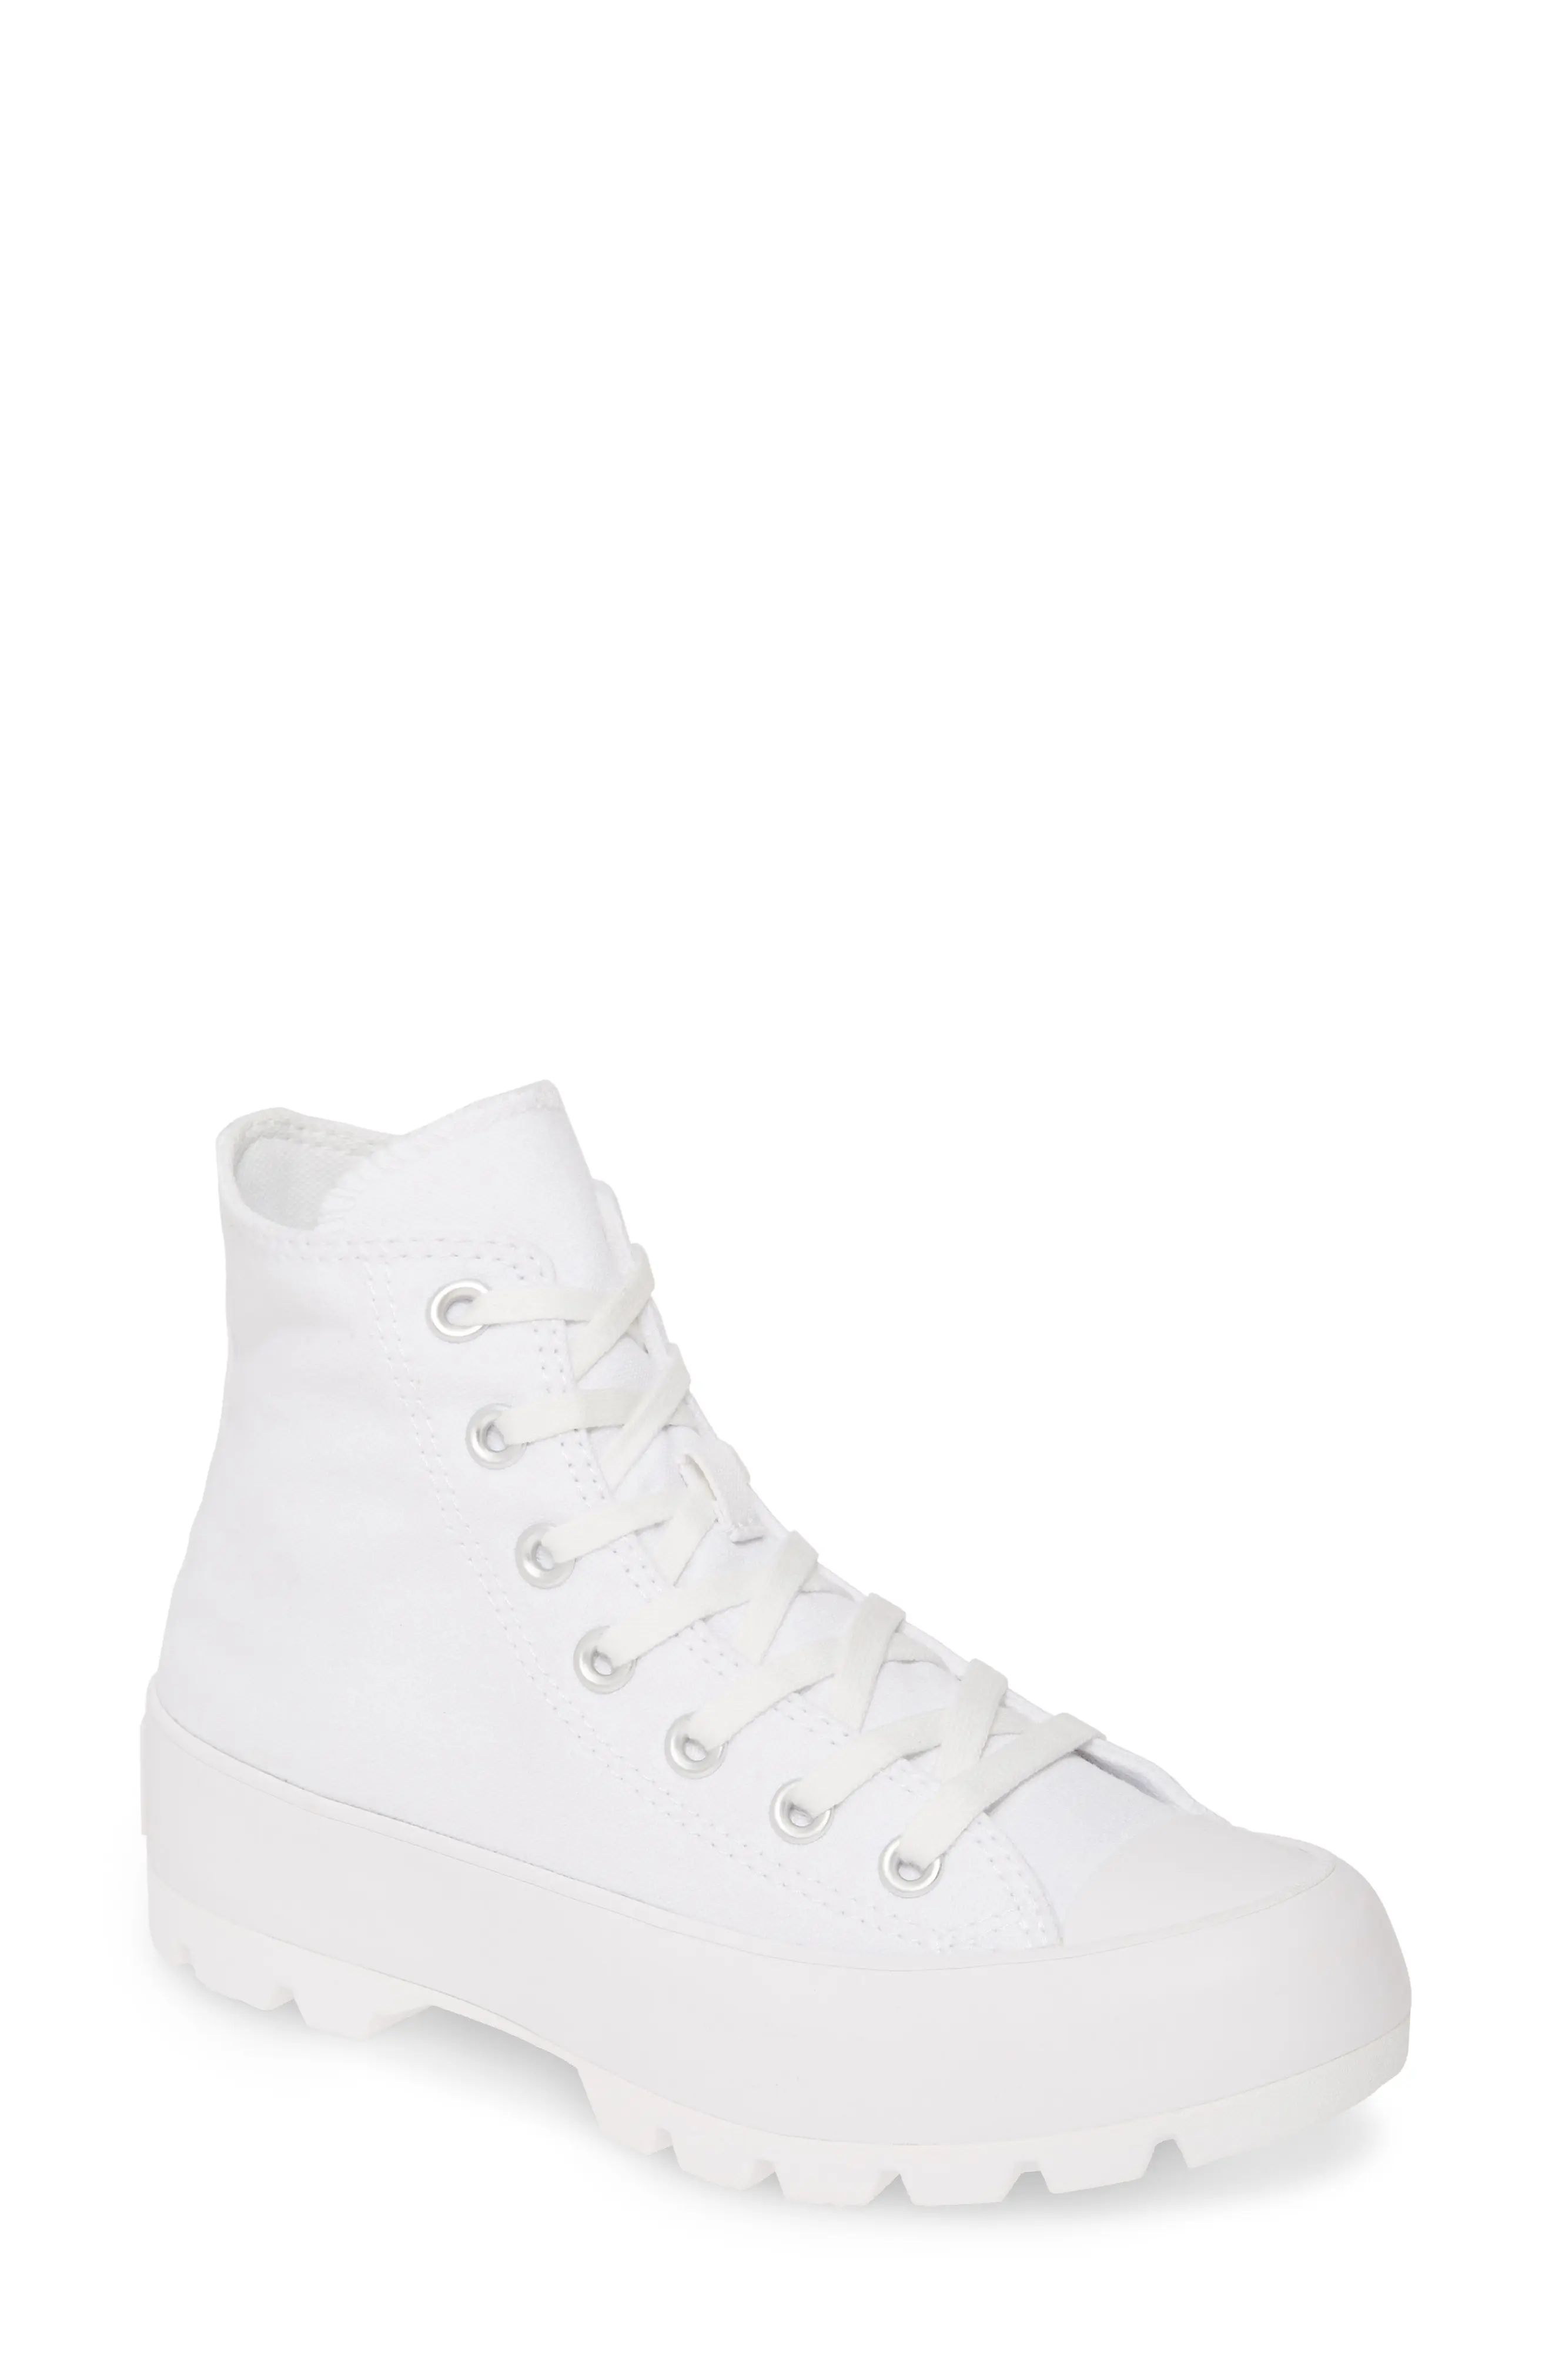 Converse Chuck Taylor(R) All Star(R) Lugged Boot in White/Black/White at Nordstrom, Size 6 Women's | Nordstrom